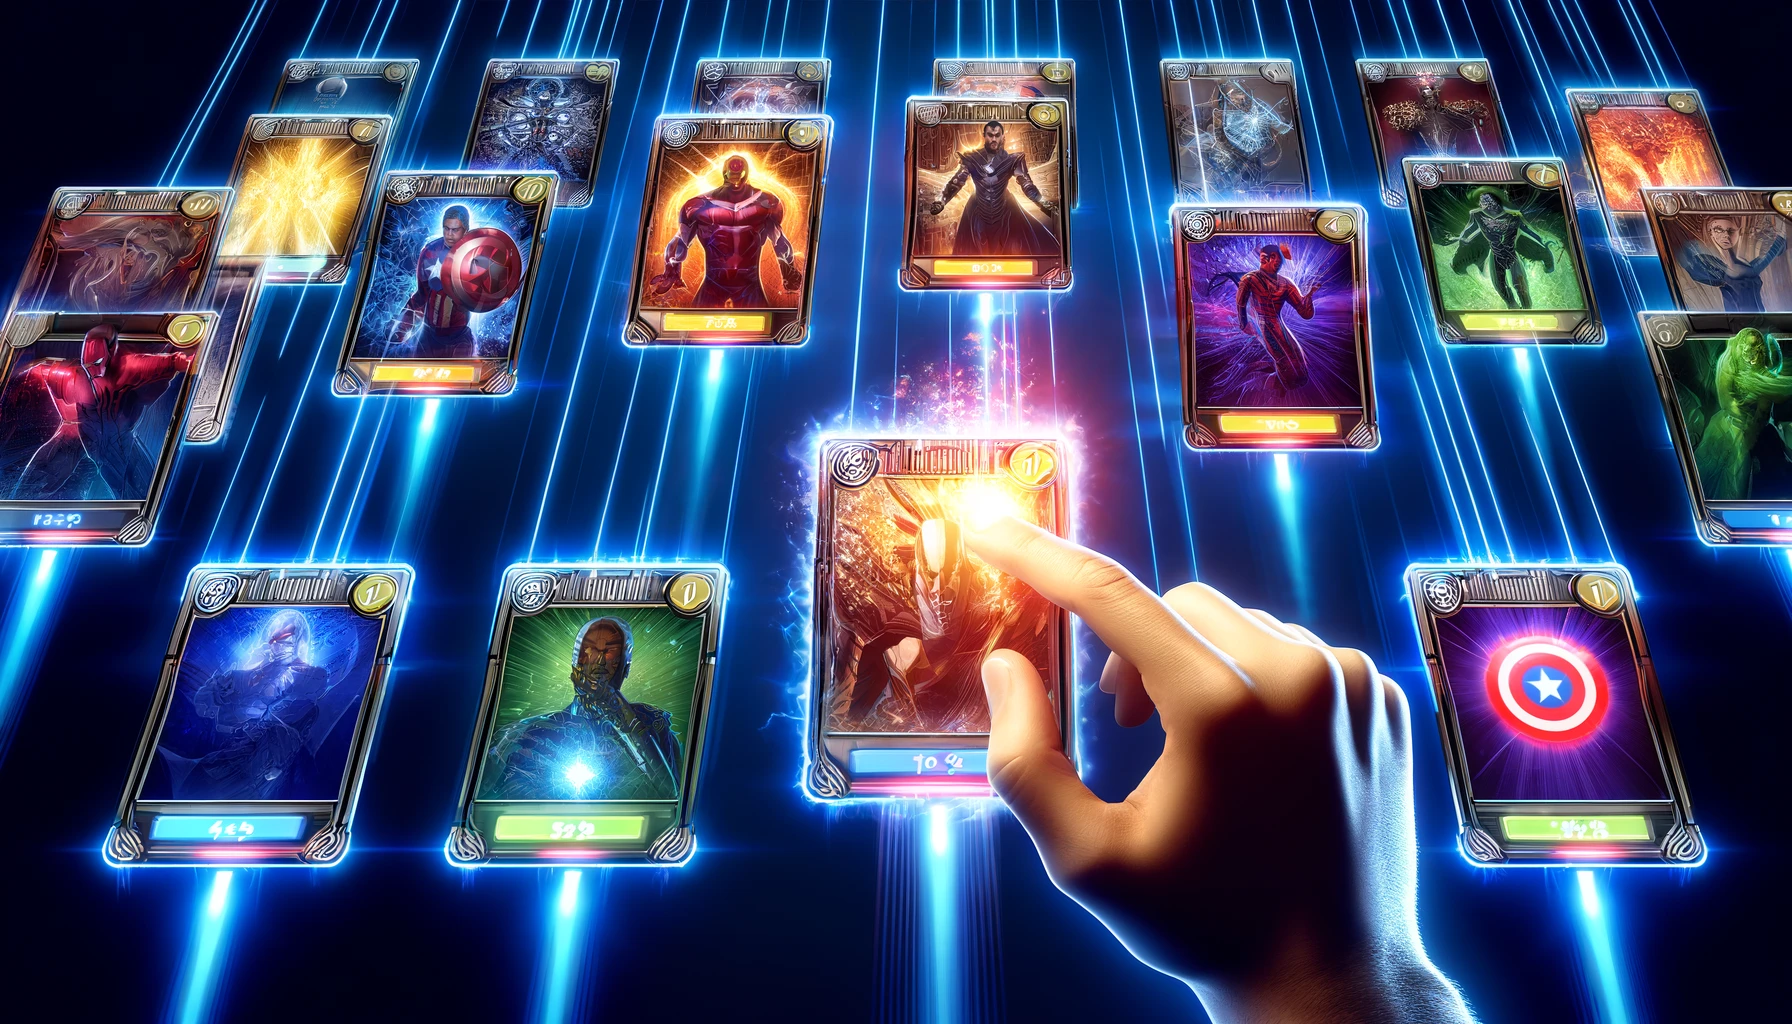 A visually compelling representation of Marvel card upgrades. Cards show progress bars, glowing with power. A hand upgrades a card to improve the deck, with superheroes and villains featured.